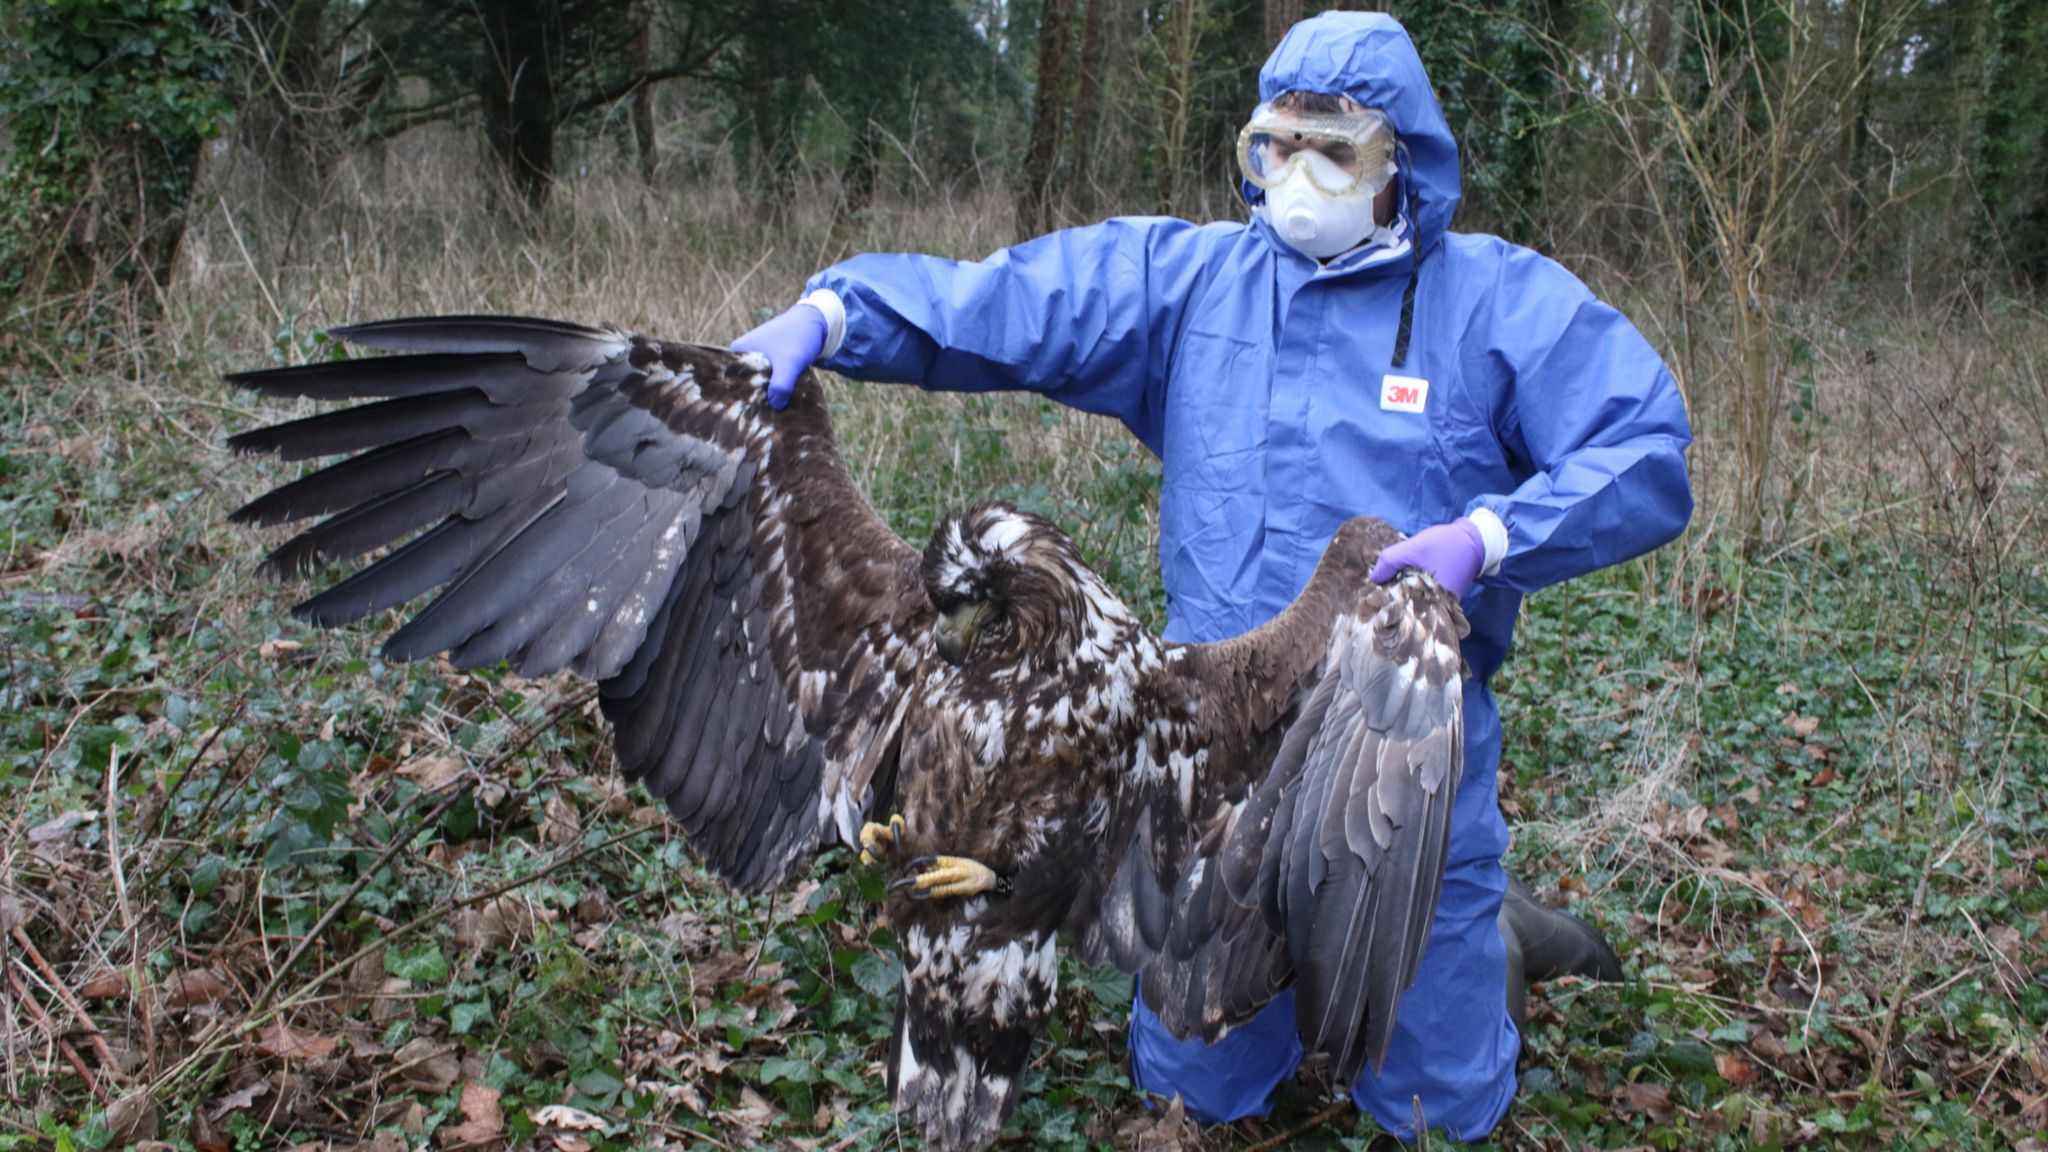 Dozens of birds of prey 'illegally shot, poisoned or trapped' in